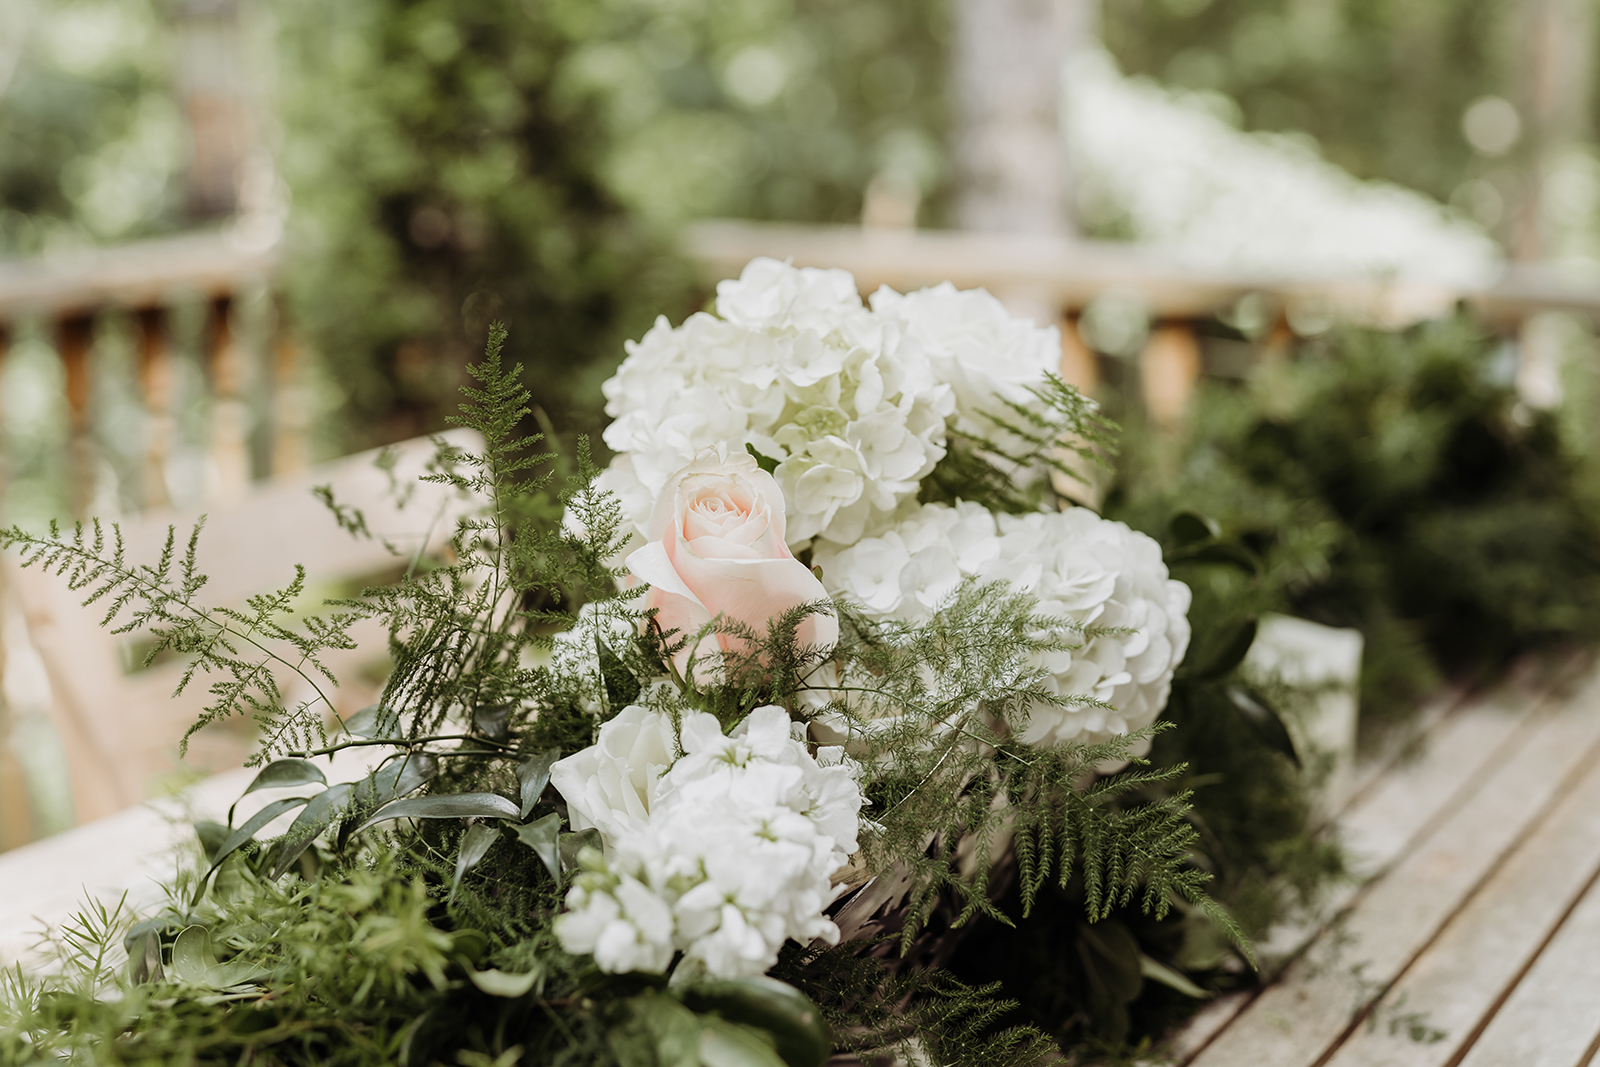 Skyline Events and Socials Florals feature White Hydrangeas